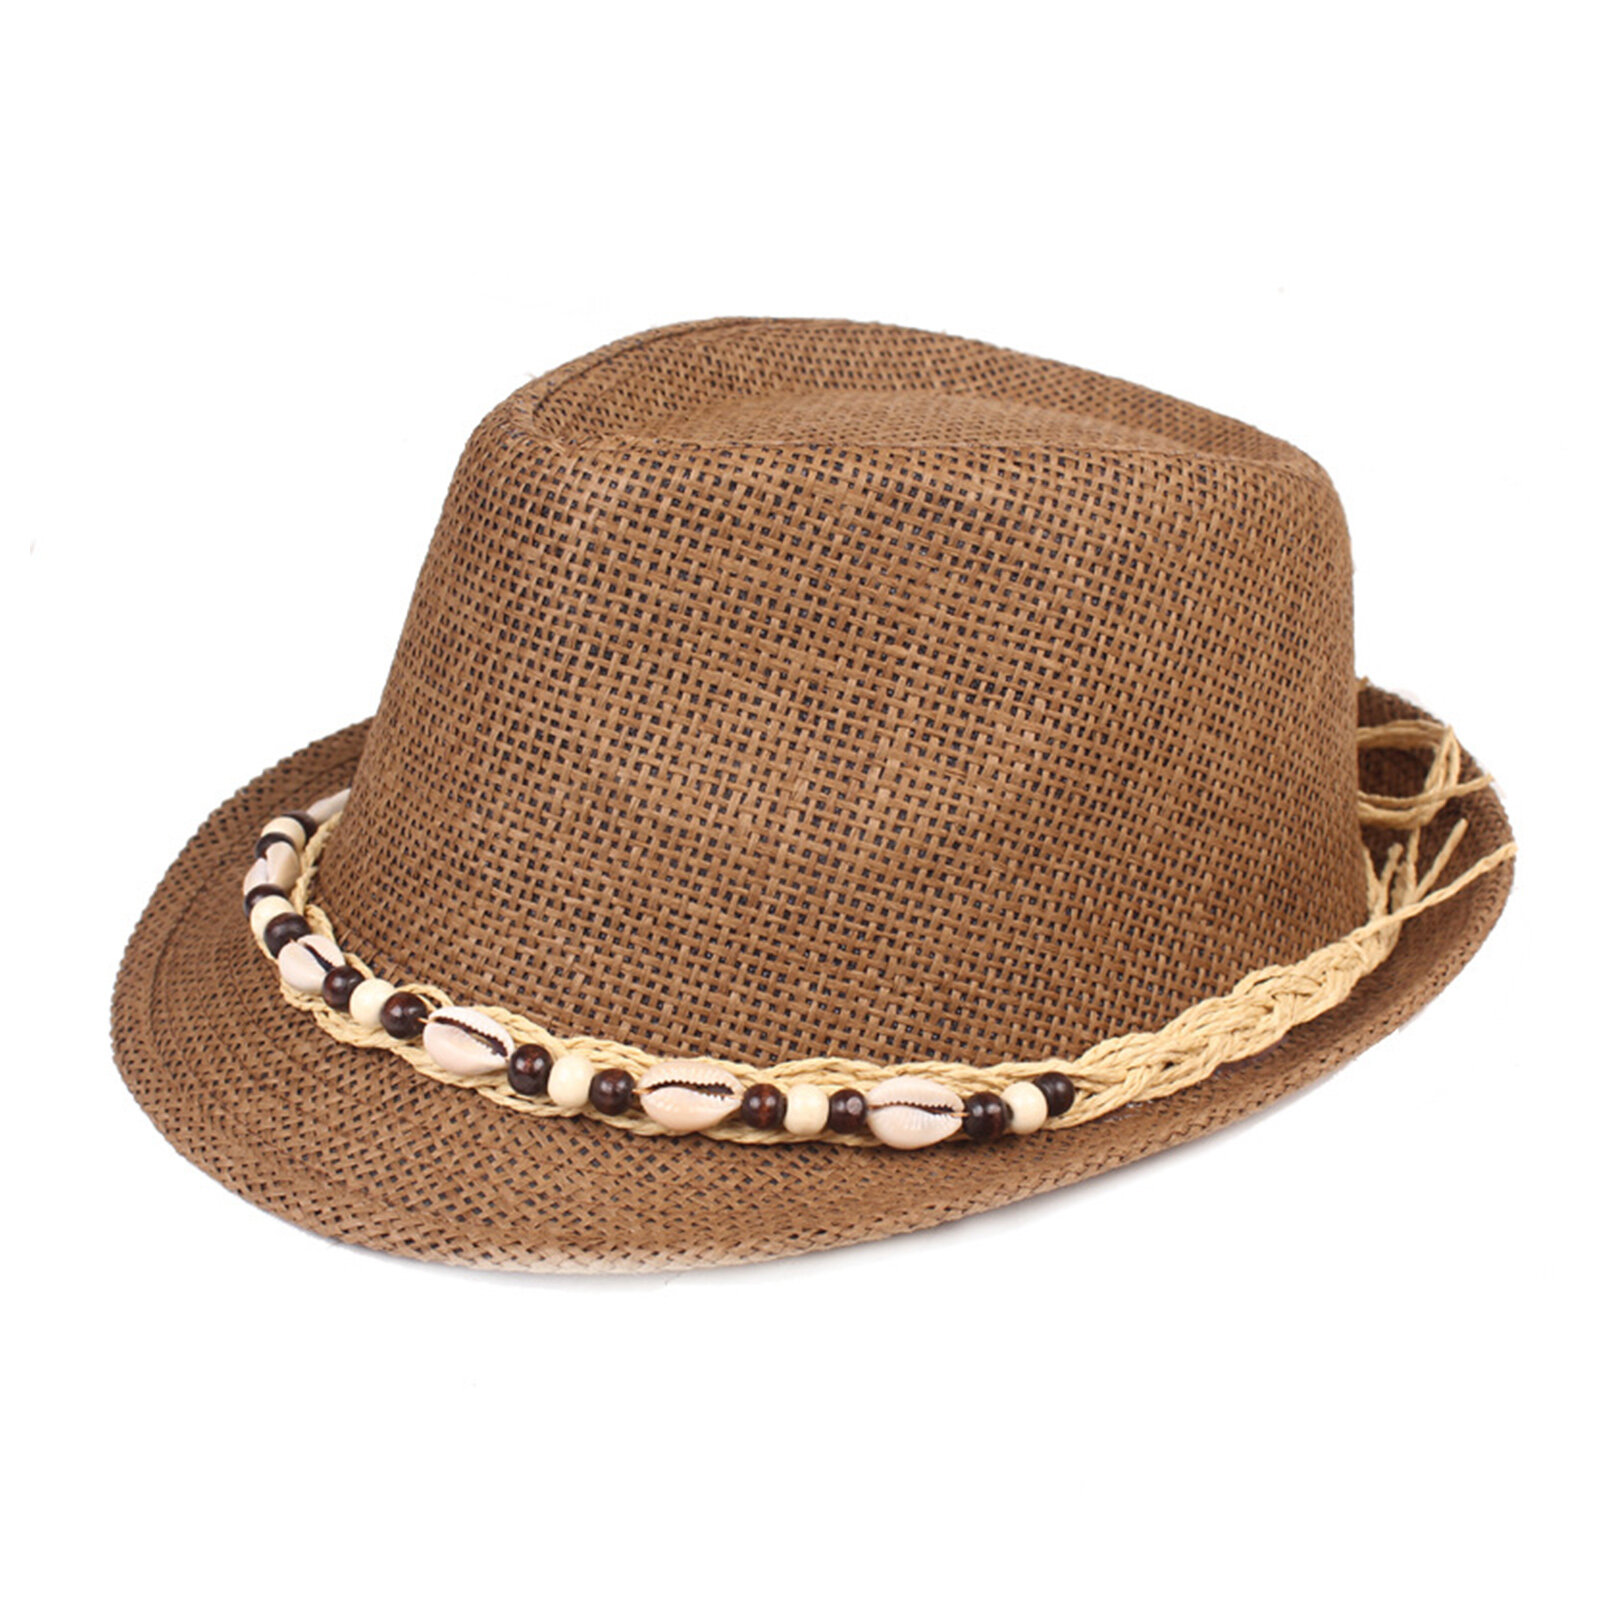 Men Straw Casual Vacation All-match Breathable Sunshade Top Hats Flat Hats